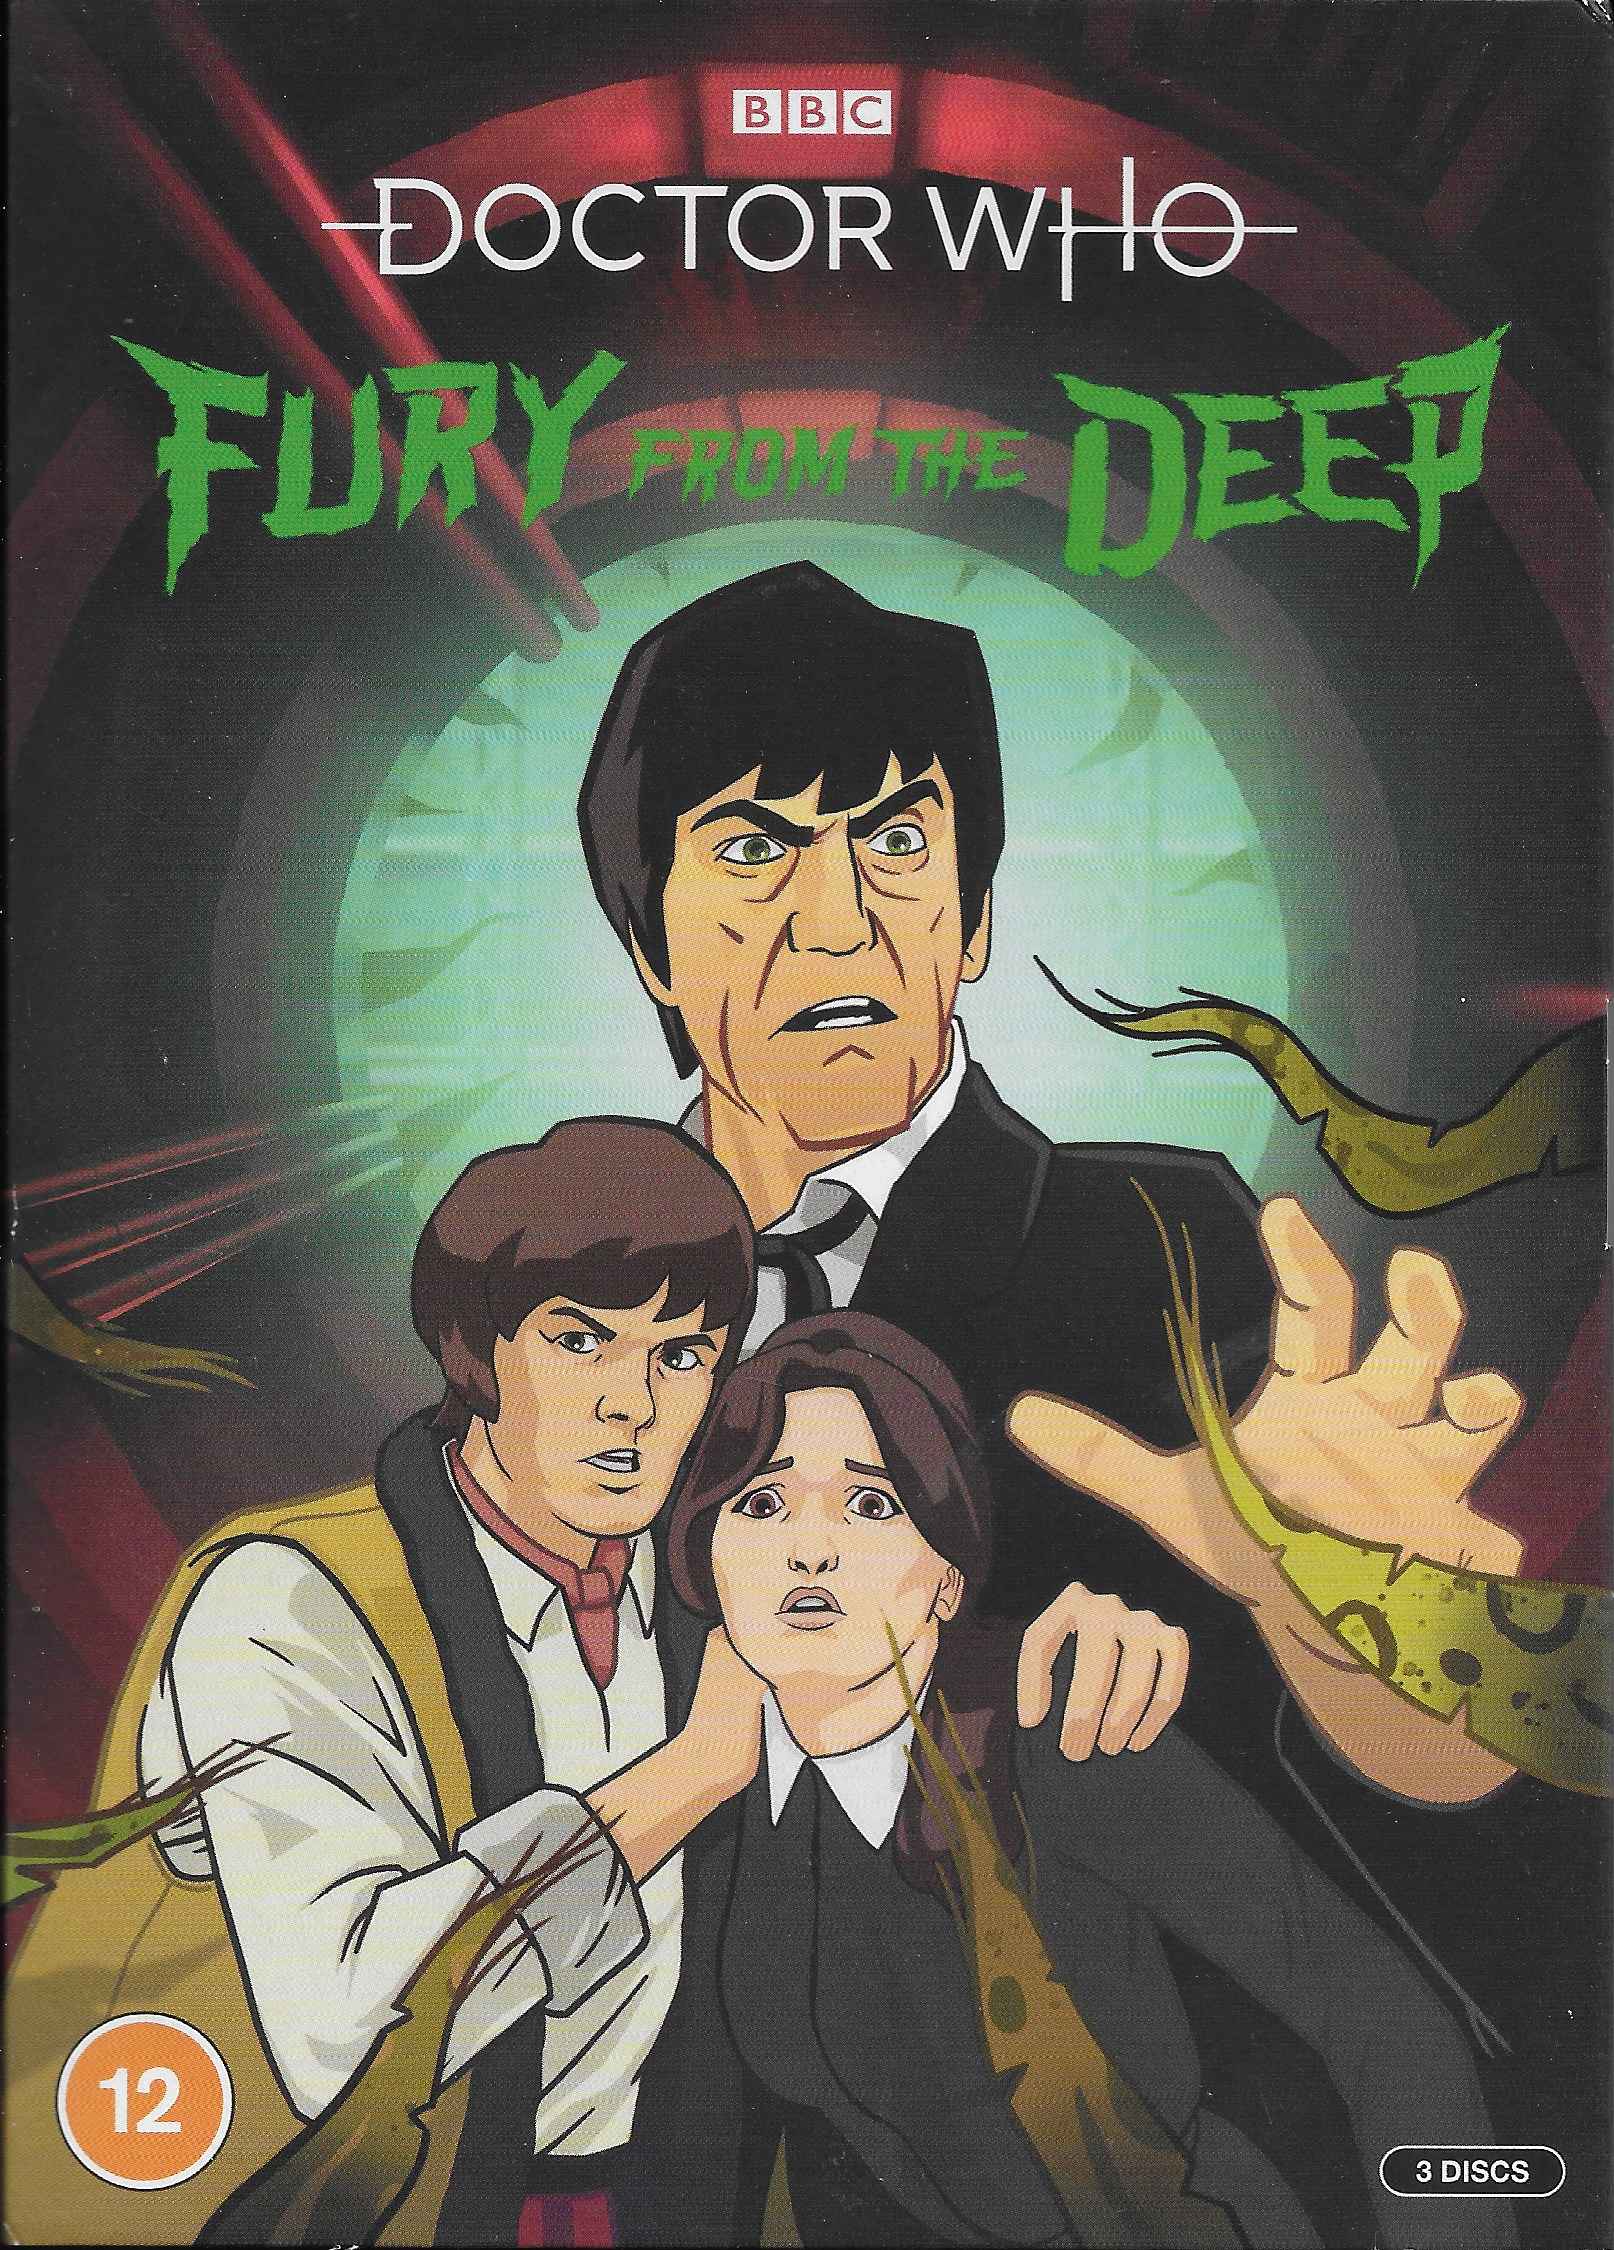 Picture of BBCDVD 4428 Doctor Who - Fury from the deep by artist Victor Pemberton from the BBC records and Tapes library